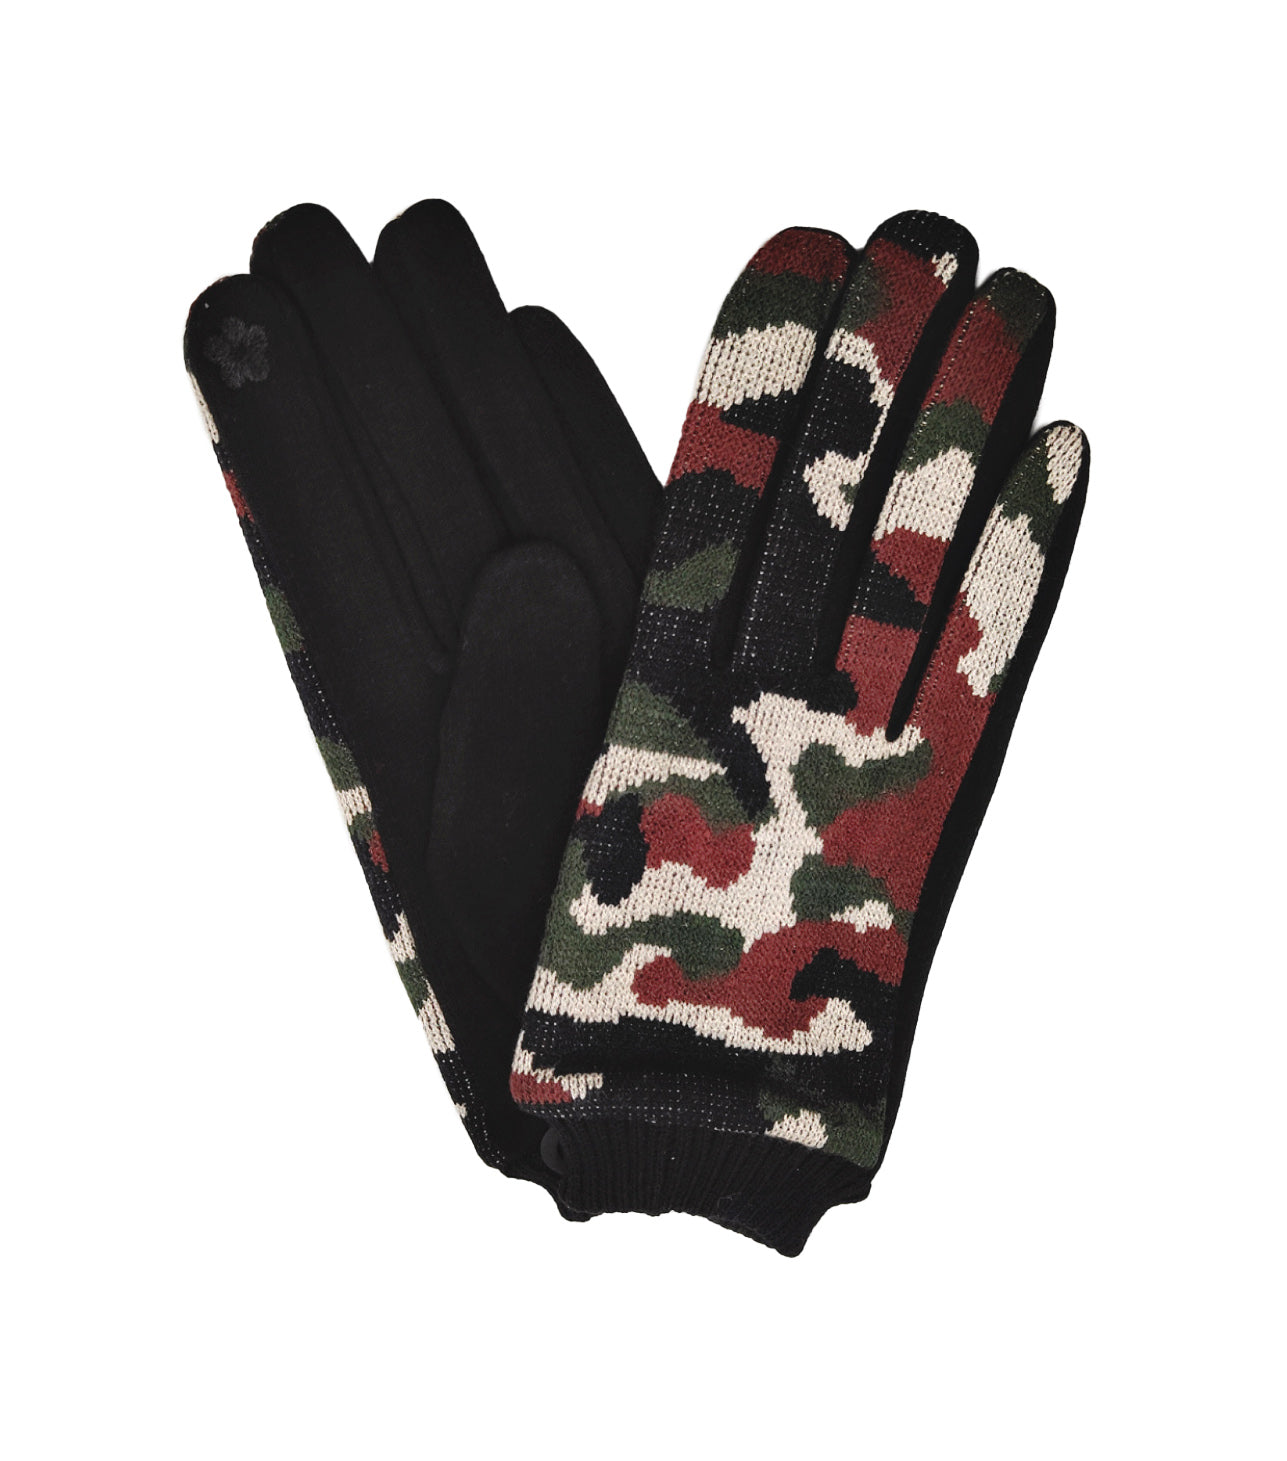 Shop for KW Fashion Camo Touch Gloves at doeverythinginloveny.com wholesale fashion accessories